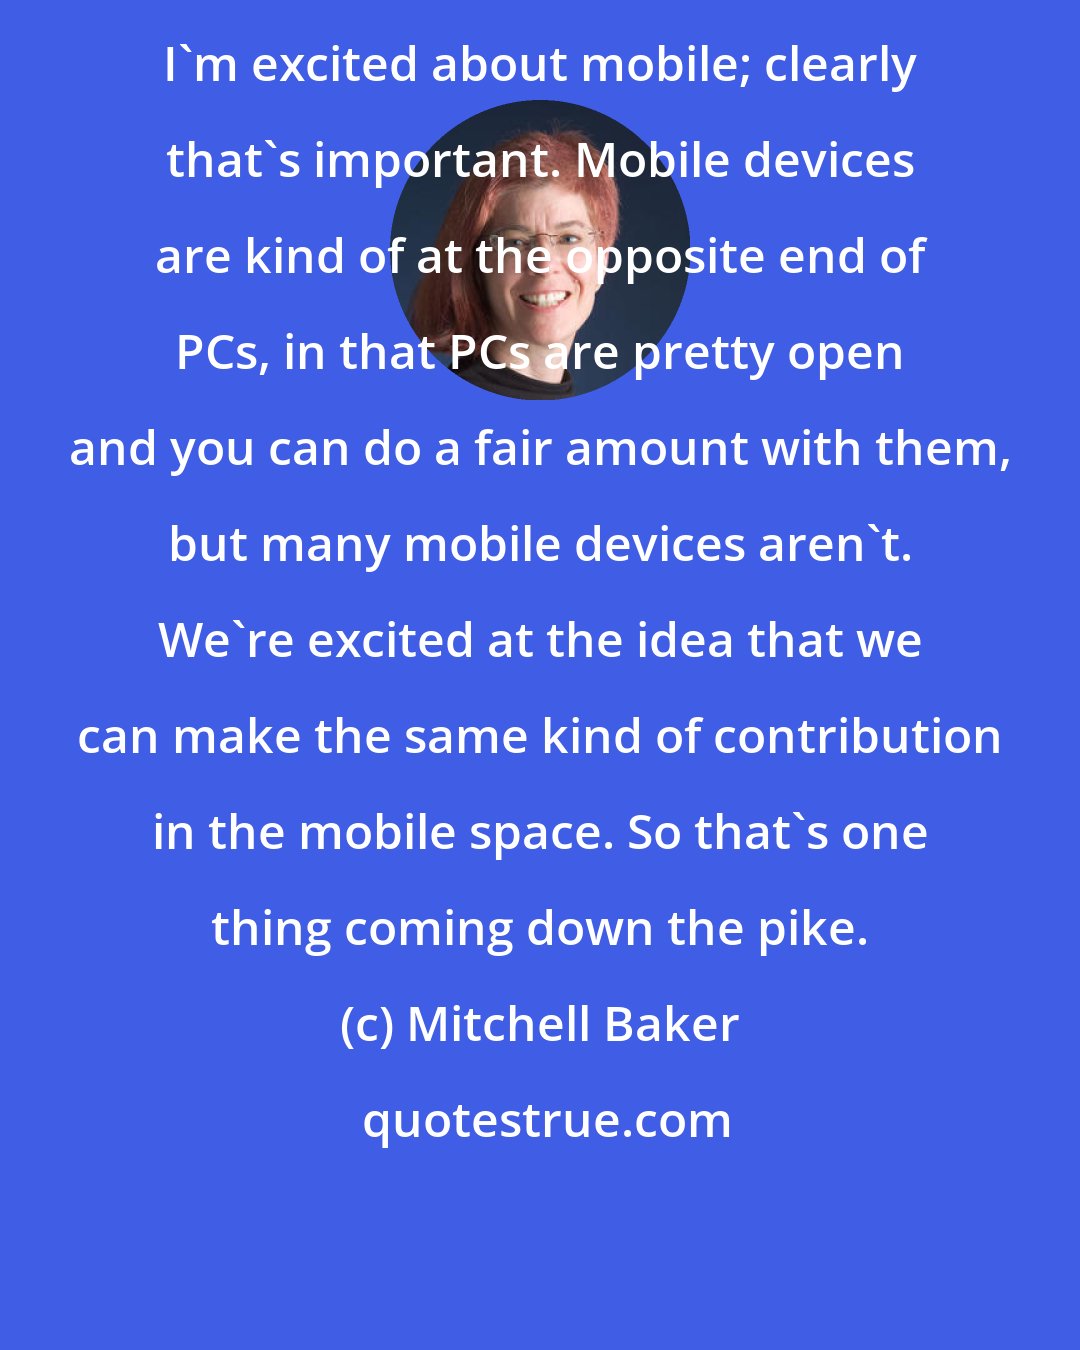 Mitchell Baker: I'm excited about mobile; clearly that's important. Mobile devices are kind of at the opposite end of PCs, in that PCs are pretty open and you can do a fair amount with them, but many mobile devices aren't. We're excited at the idea that we can make the same kind of contribution in the mobile space. So that's one thing coming down the pike.